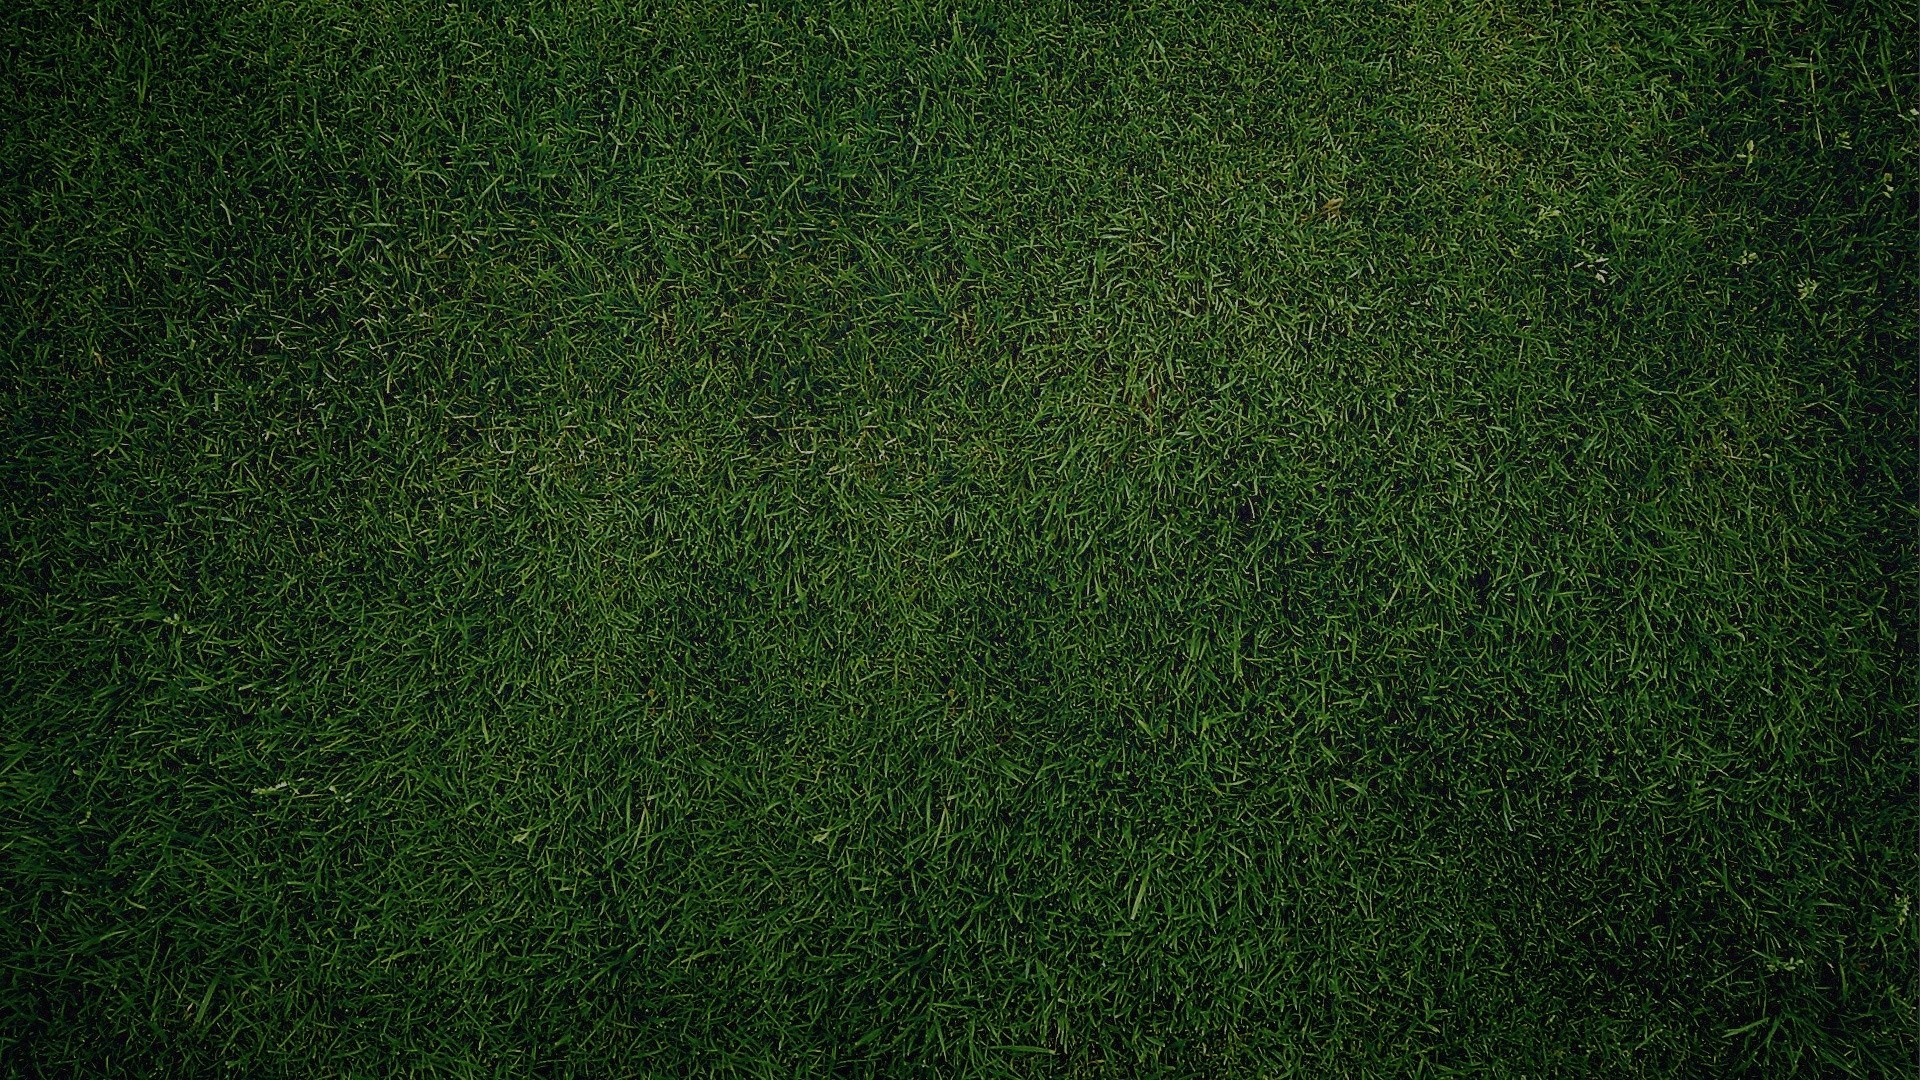 1920x1080  Green Grass Background. How to set wallpaper on your desktop?  Click the download link from above and set the wallpaper on the desktop  from your ...